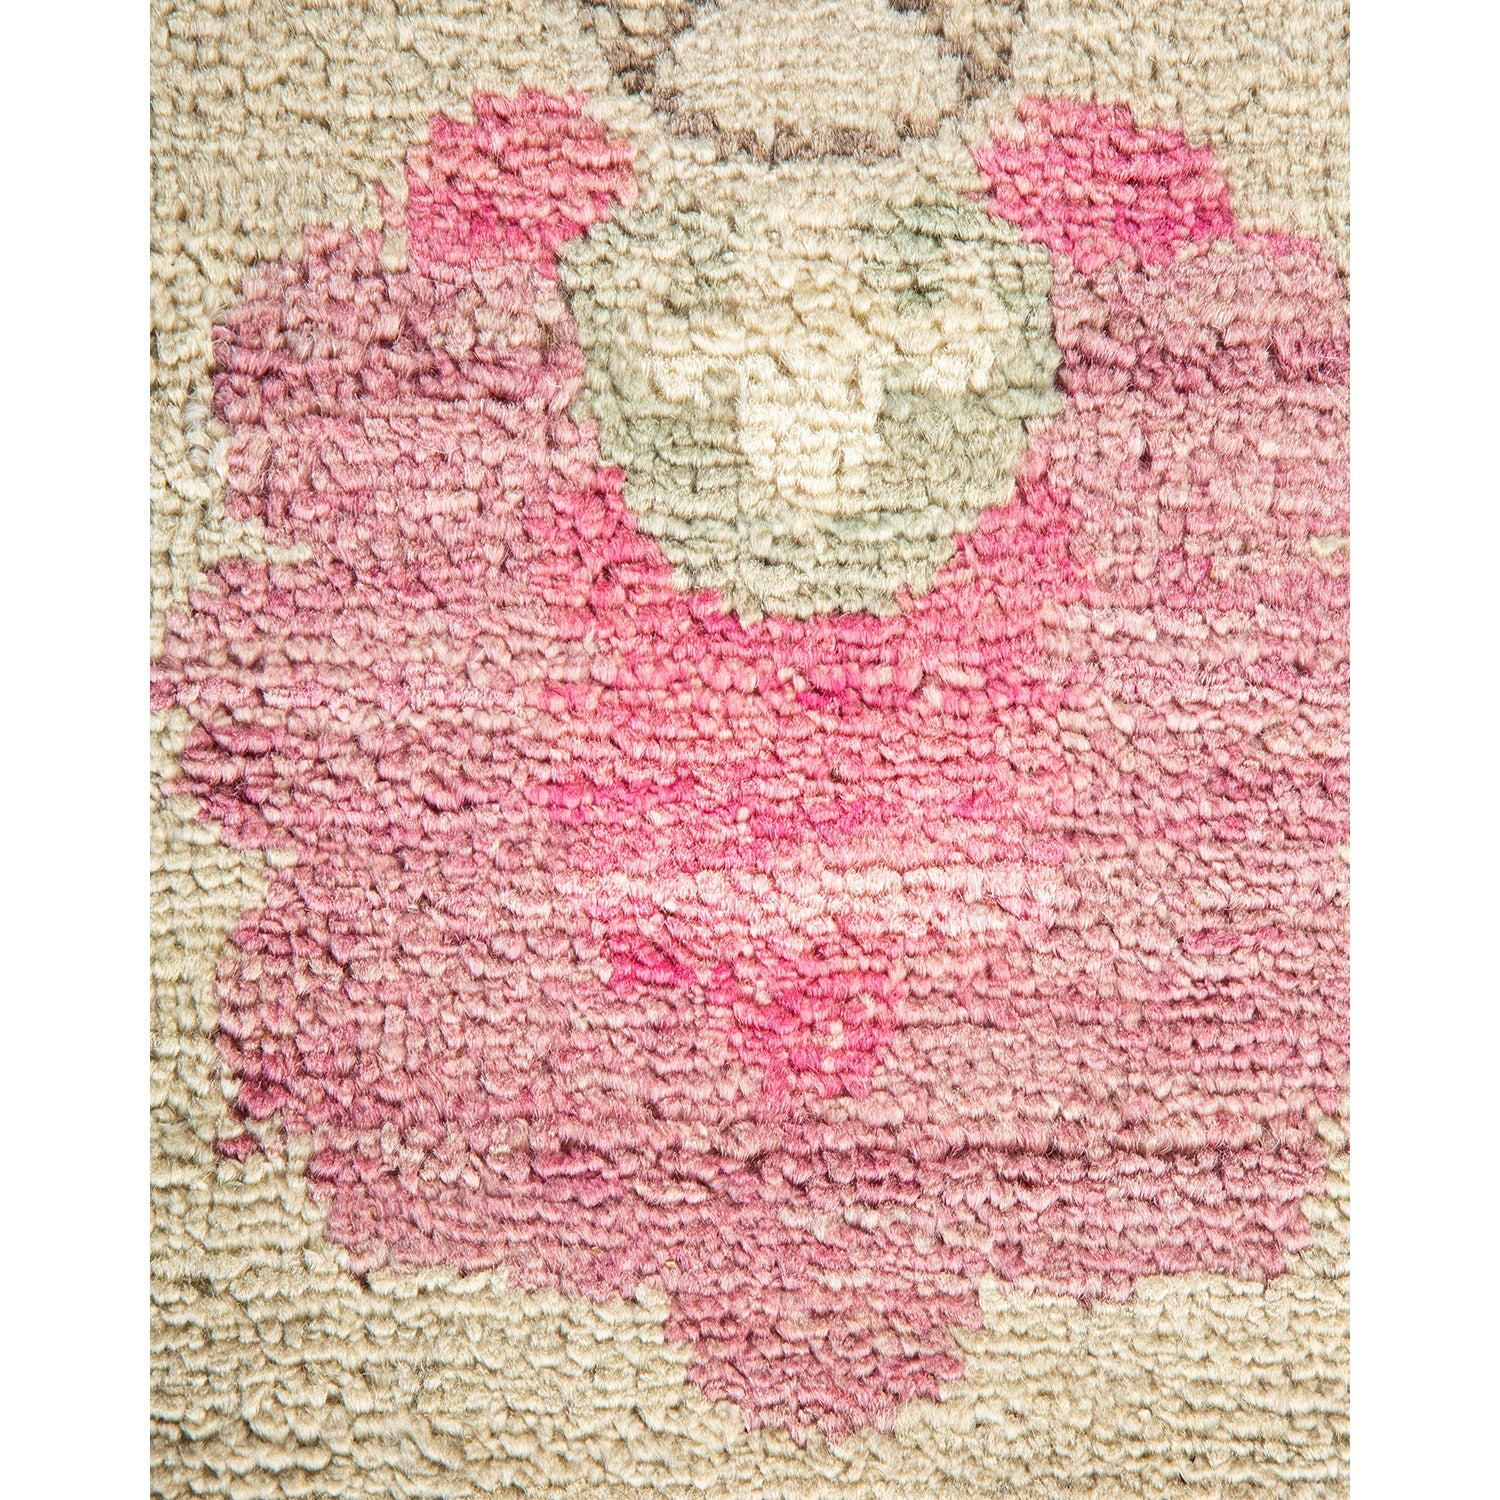 Close-up of a tufted fabric with a floral-like pink pattern.